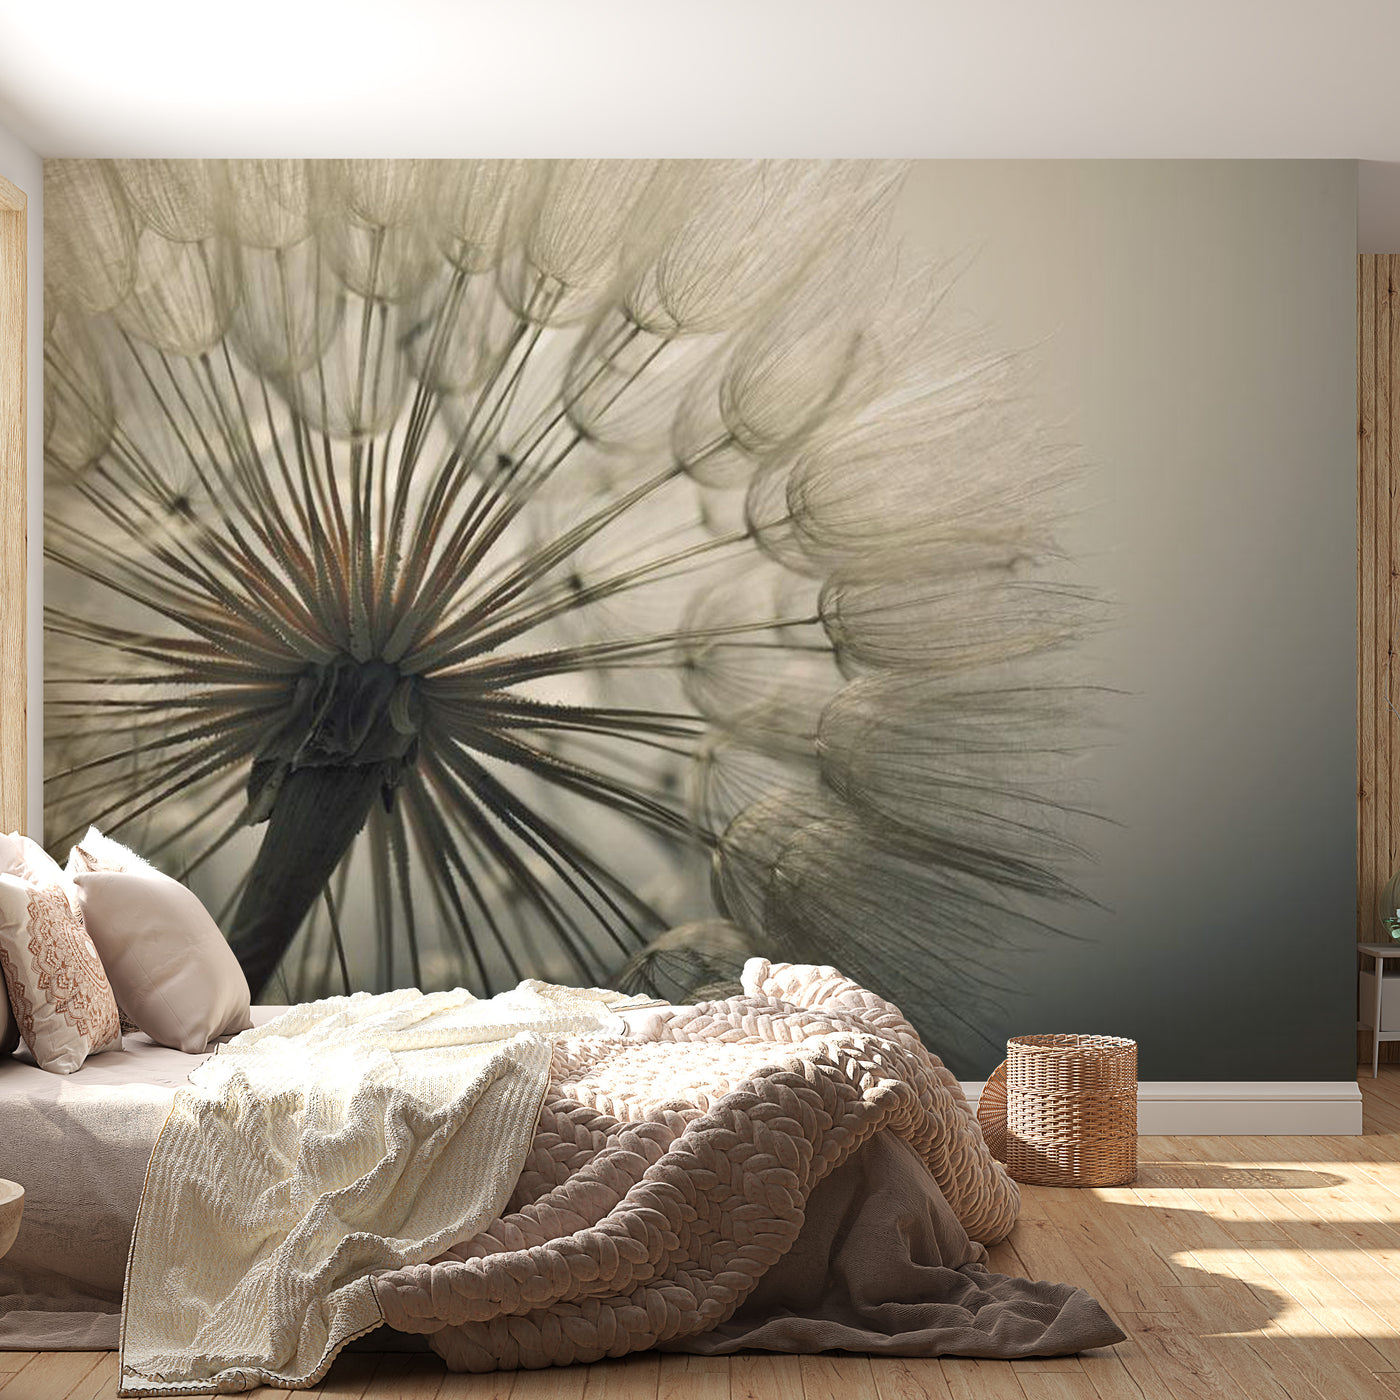 Peel & Stick Botanical Wall Mural - Dandelion In Morning Light - Removable Wall Decals